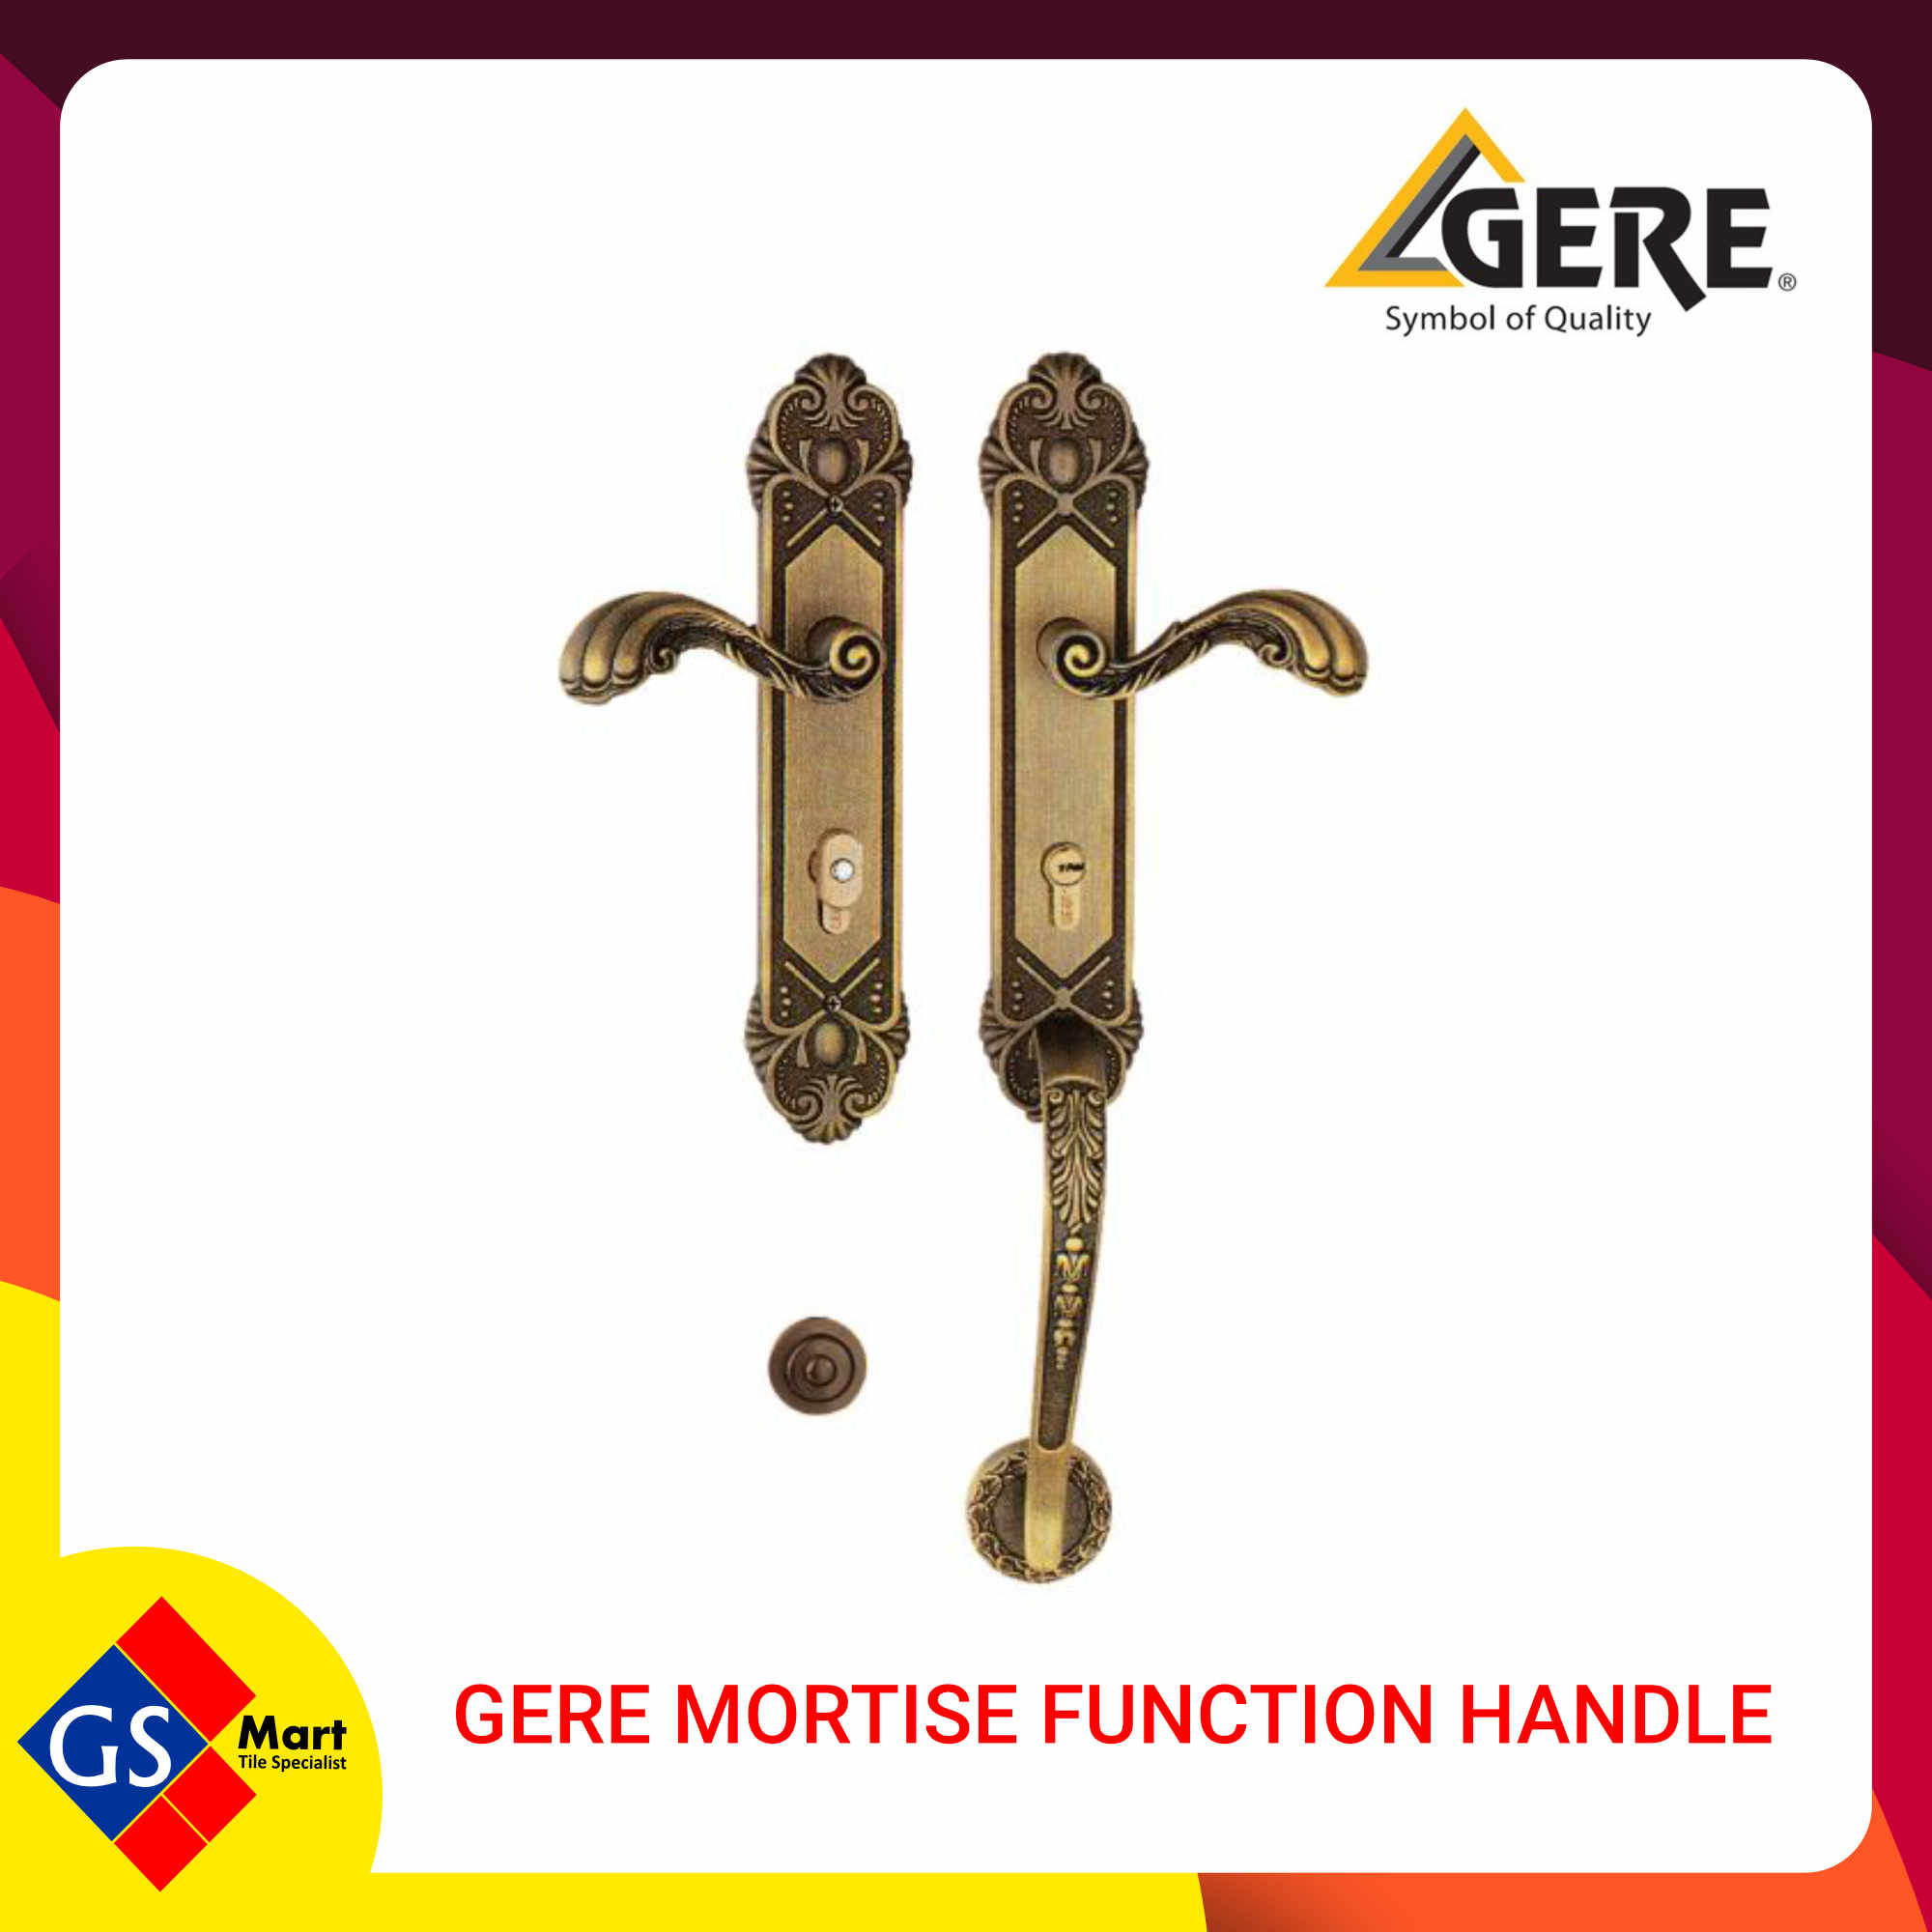 GERE MORTISE FUNCTION HANDLE